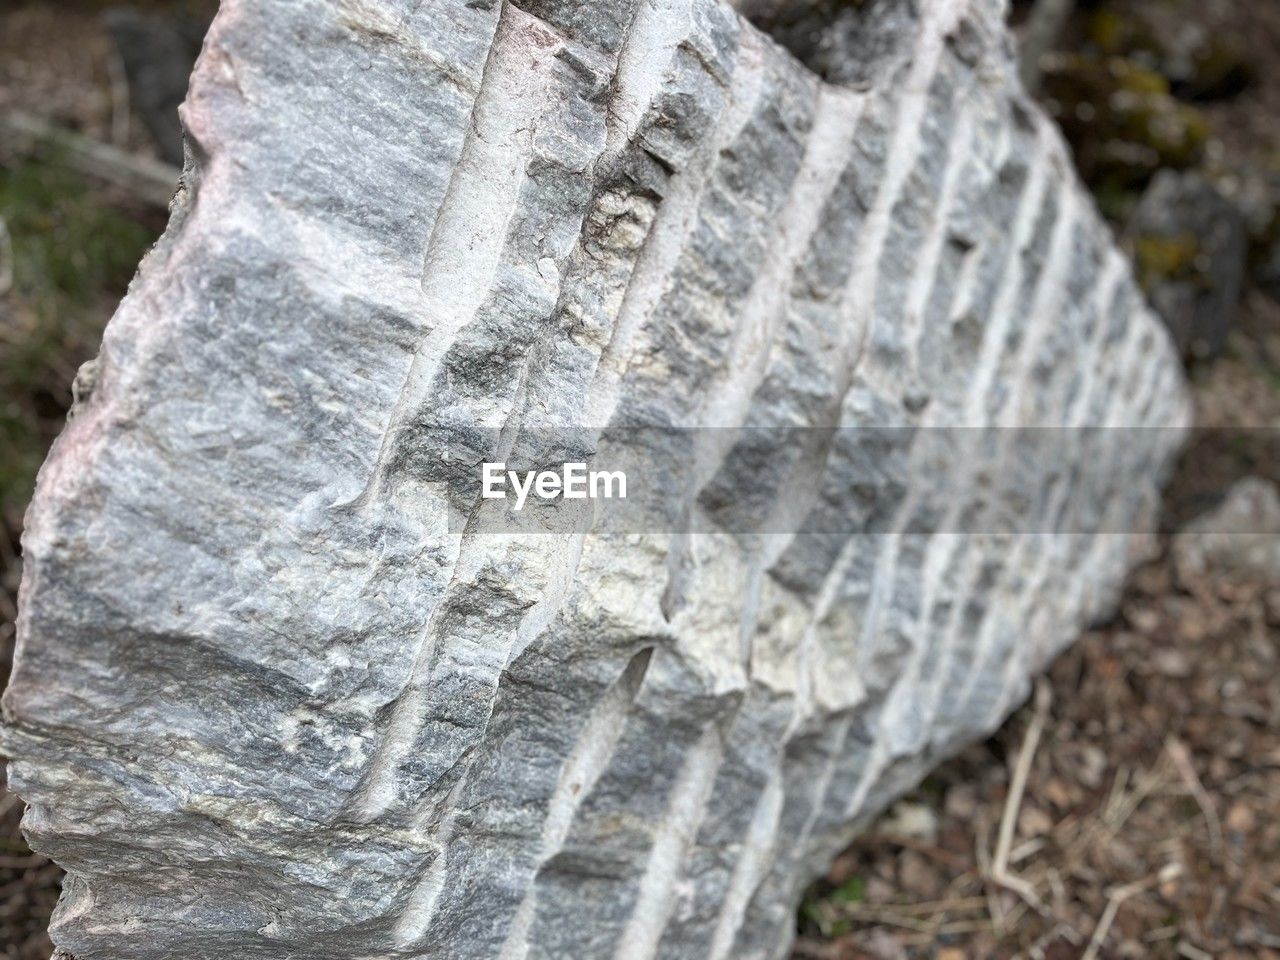 rock, close-up, nature, wood, no people, textured, day, trunk, geology, leaf, outdoors, focus on foreground, tree, rough, plant, pattern, land, tree trunk